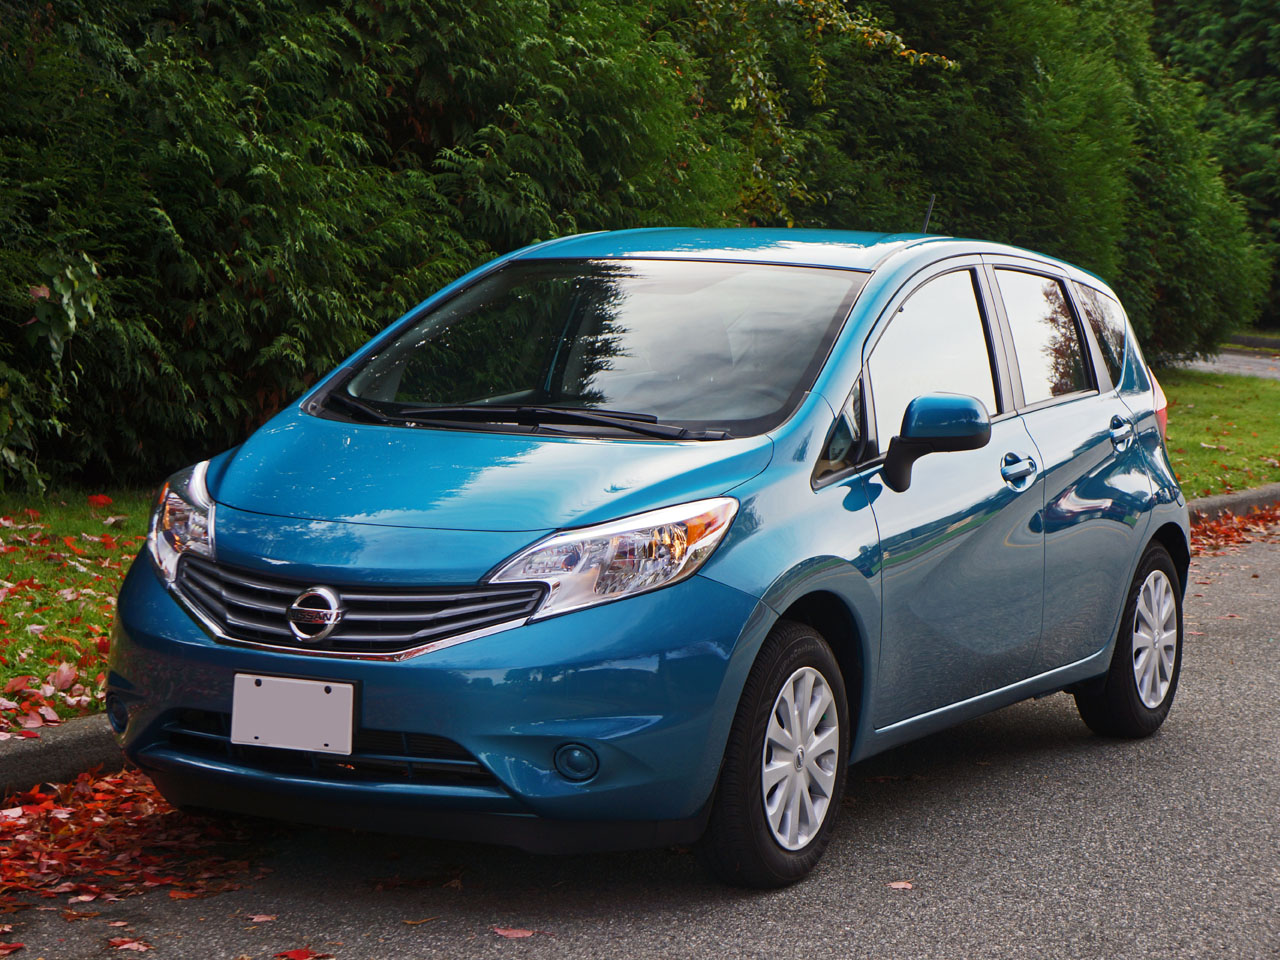 2014 Nissan Versa Note Sv Road Test Review Carcostcanada